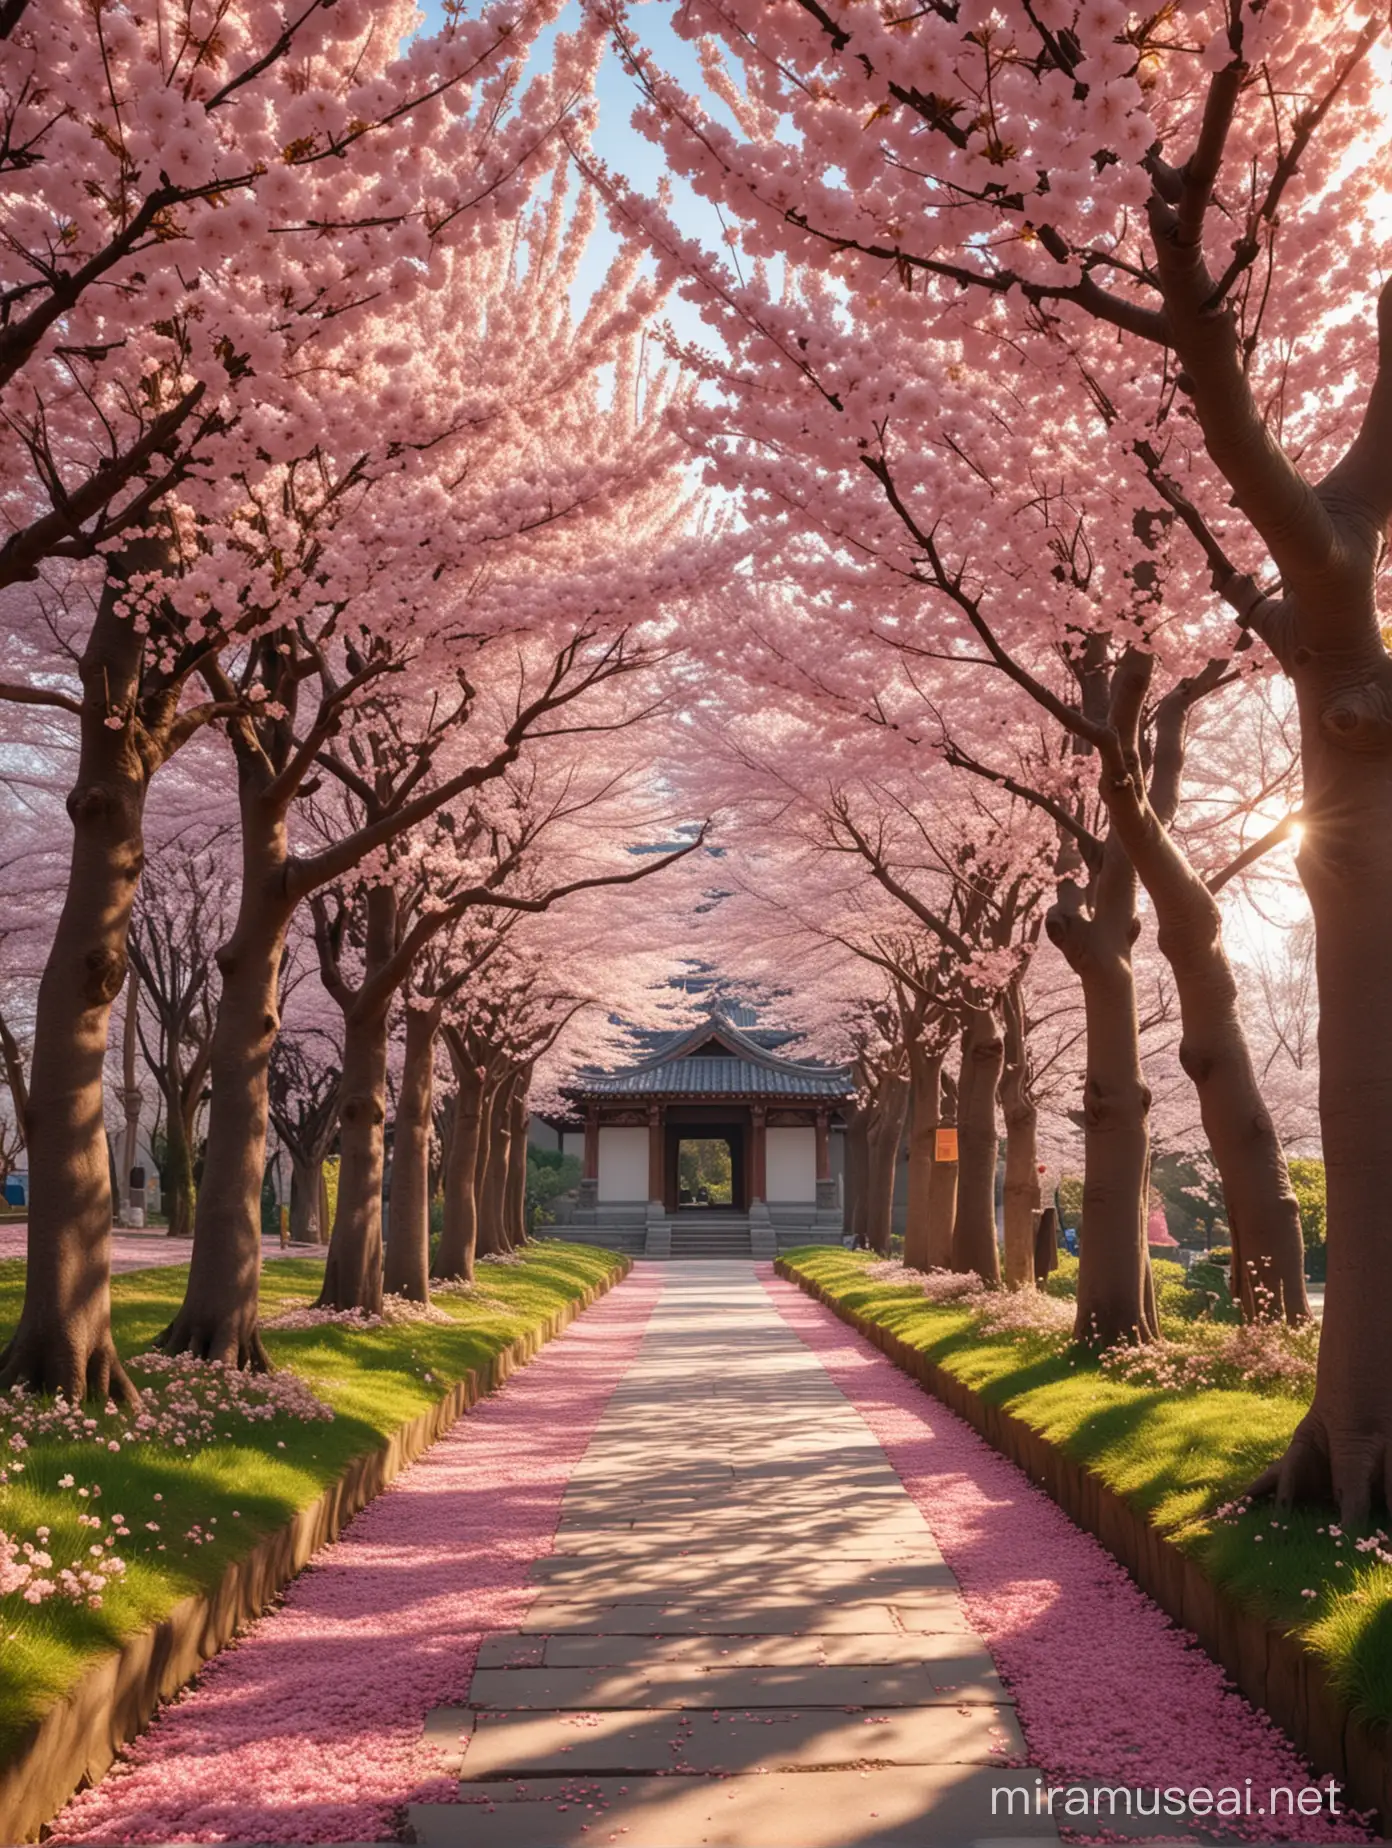 Tranquil Temple Trail with Cherry Blossom Canopy